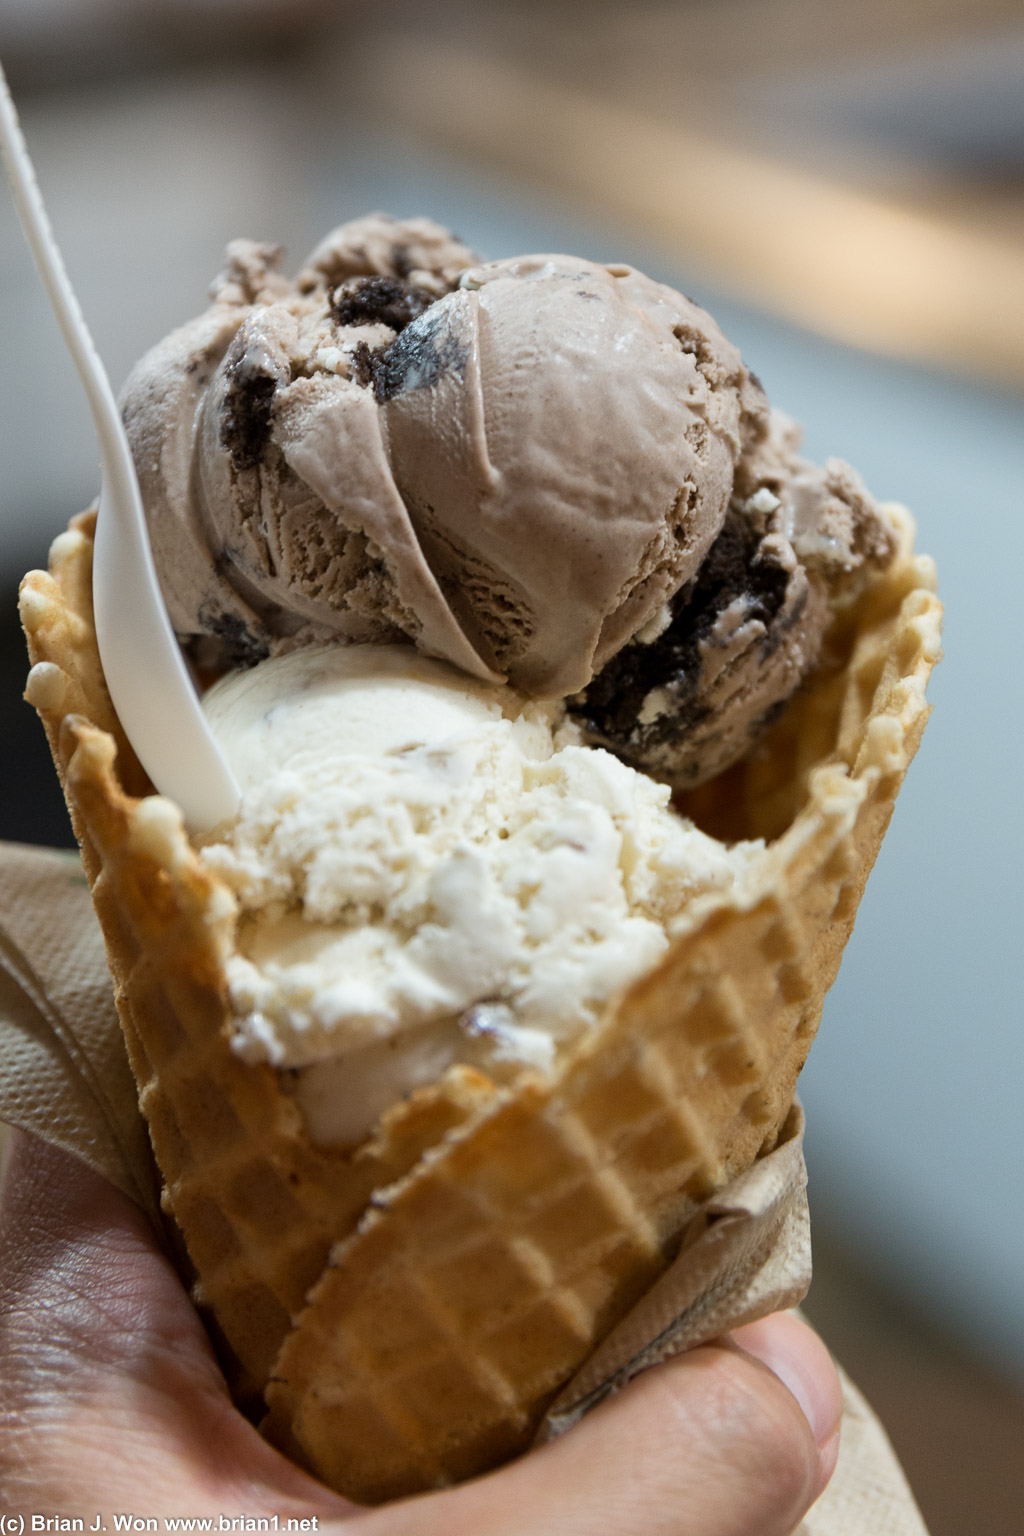 Chocolate oreo cookie and butter pecan in a waffle cone. Very good, not as creamy as some others, but still superb.